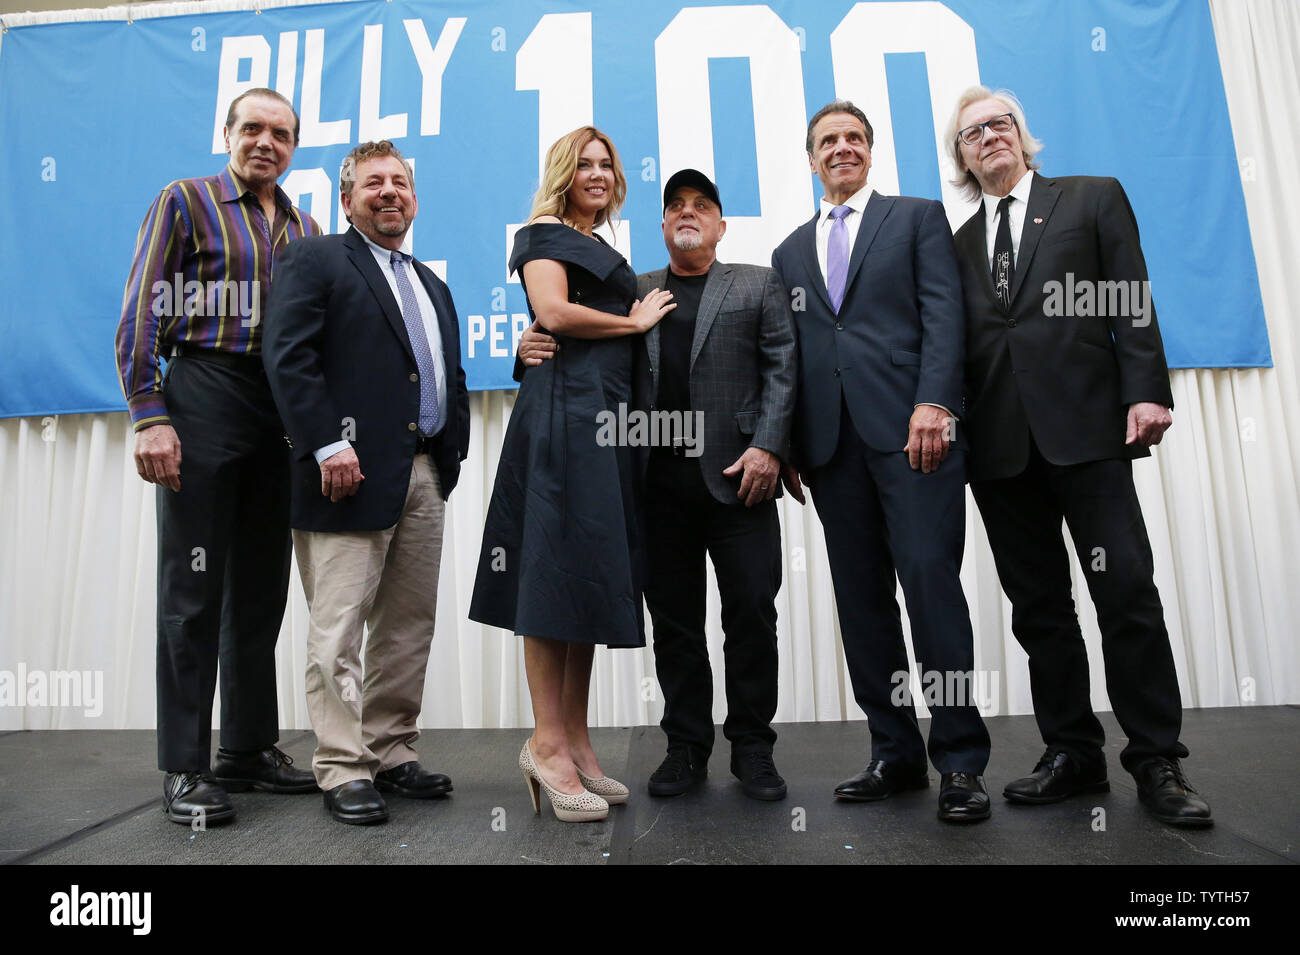 Chazz Palminteri, The Madison Square Company executive chairman and CEO James L. Dolan, Alexis Joel, Billy Joel, Governor Andrew M. Cuomo and Jim Kerr stand in front of Joel's 100 Shows banner after a press conference when The Madison Square Garden Company celebrates Billy Joel's unprecedented achievement of 100 lifetime performances at Madison Square Garden in New York City on July 18, 2018. As part of the press conference MSG made an announcement about a permanent display that will serve as a tribute to Joel's legacy. Joel's 100th lifetime performance comes 40 years after his first MSG perfo Stock Photo